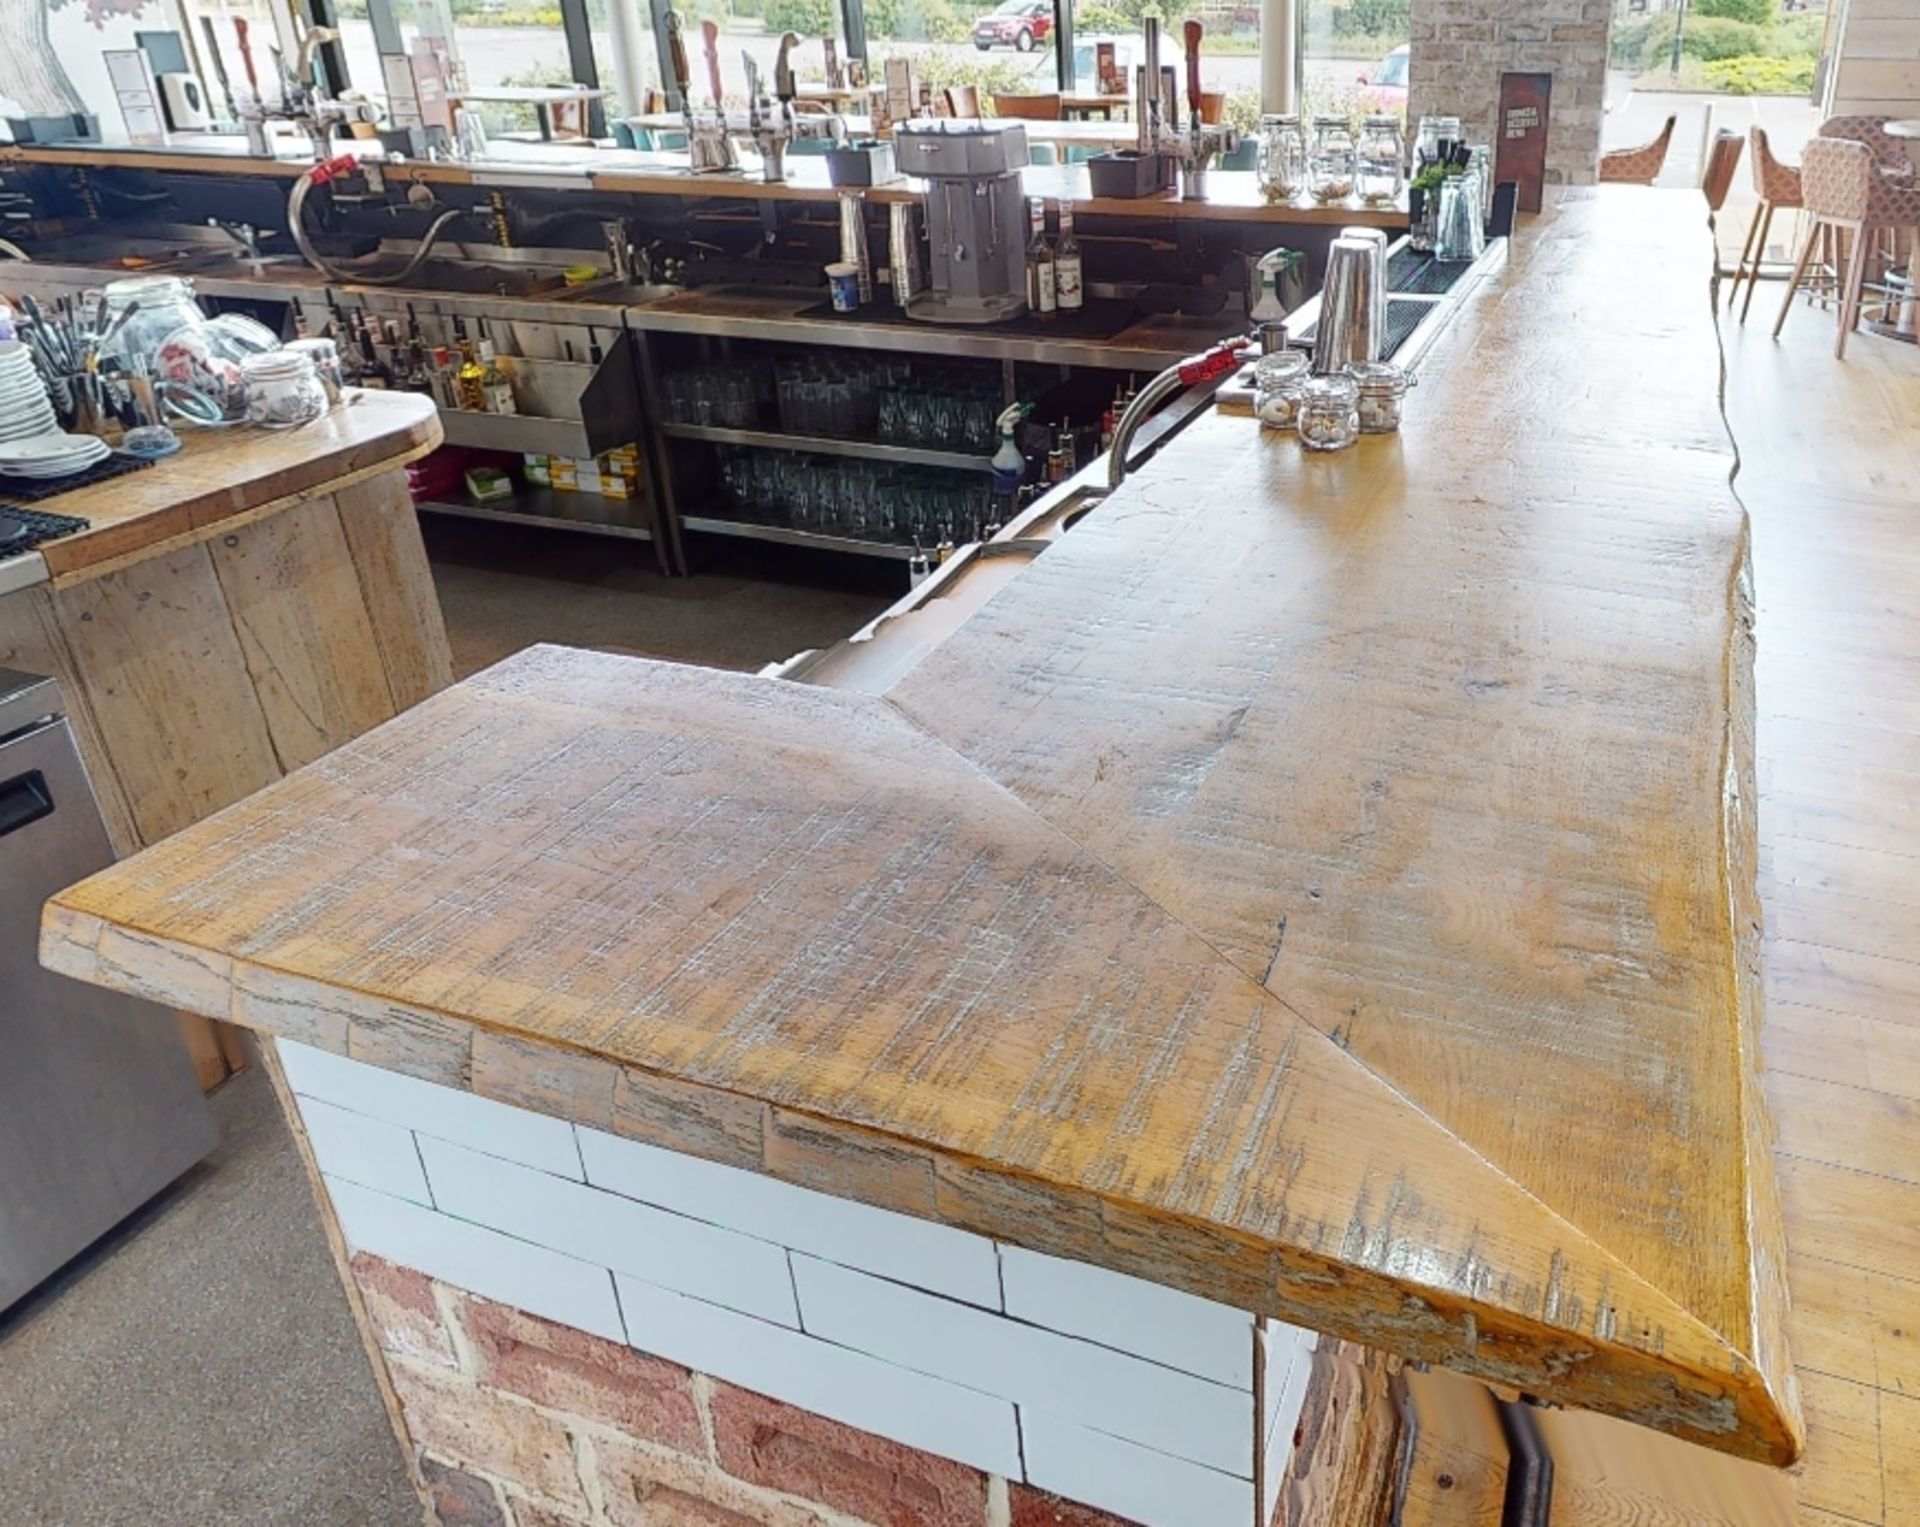 1 x Rustic Knotty Oak L Shaped Bar Top With an Earthy Finish and Live Edge - Approx 22ft in Legth! - Image 10 of 16